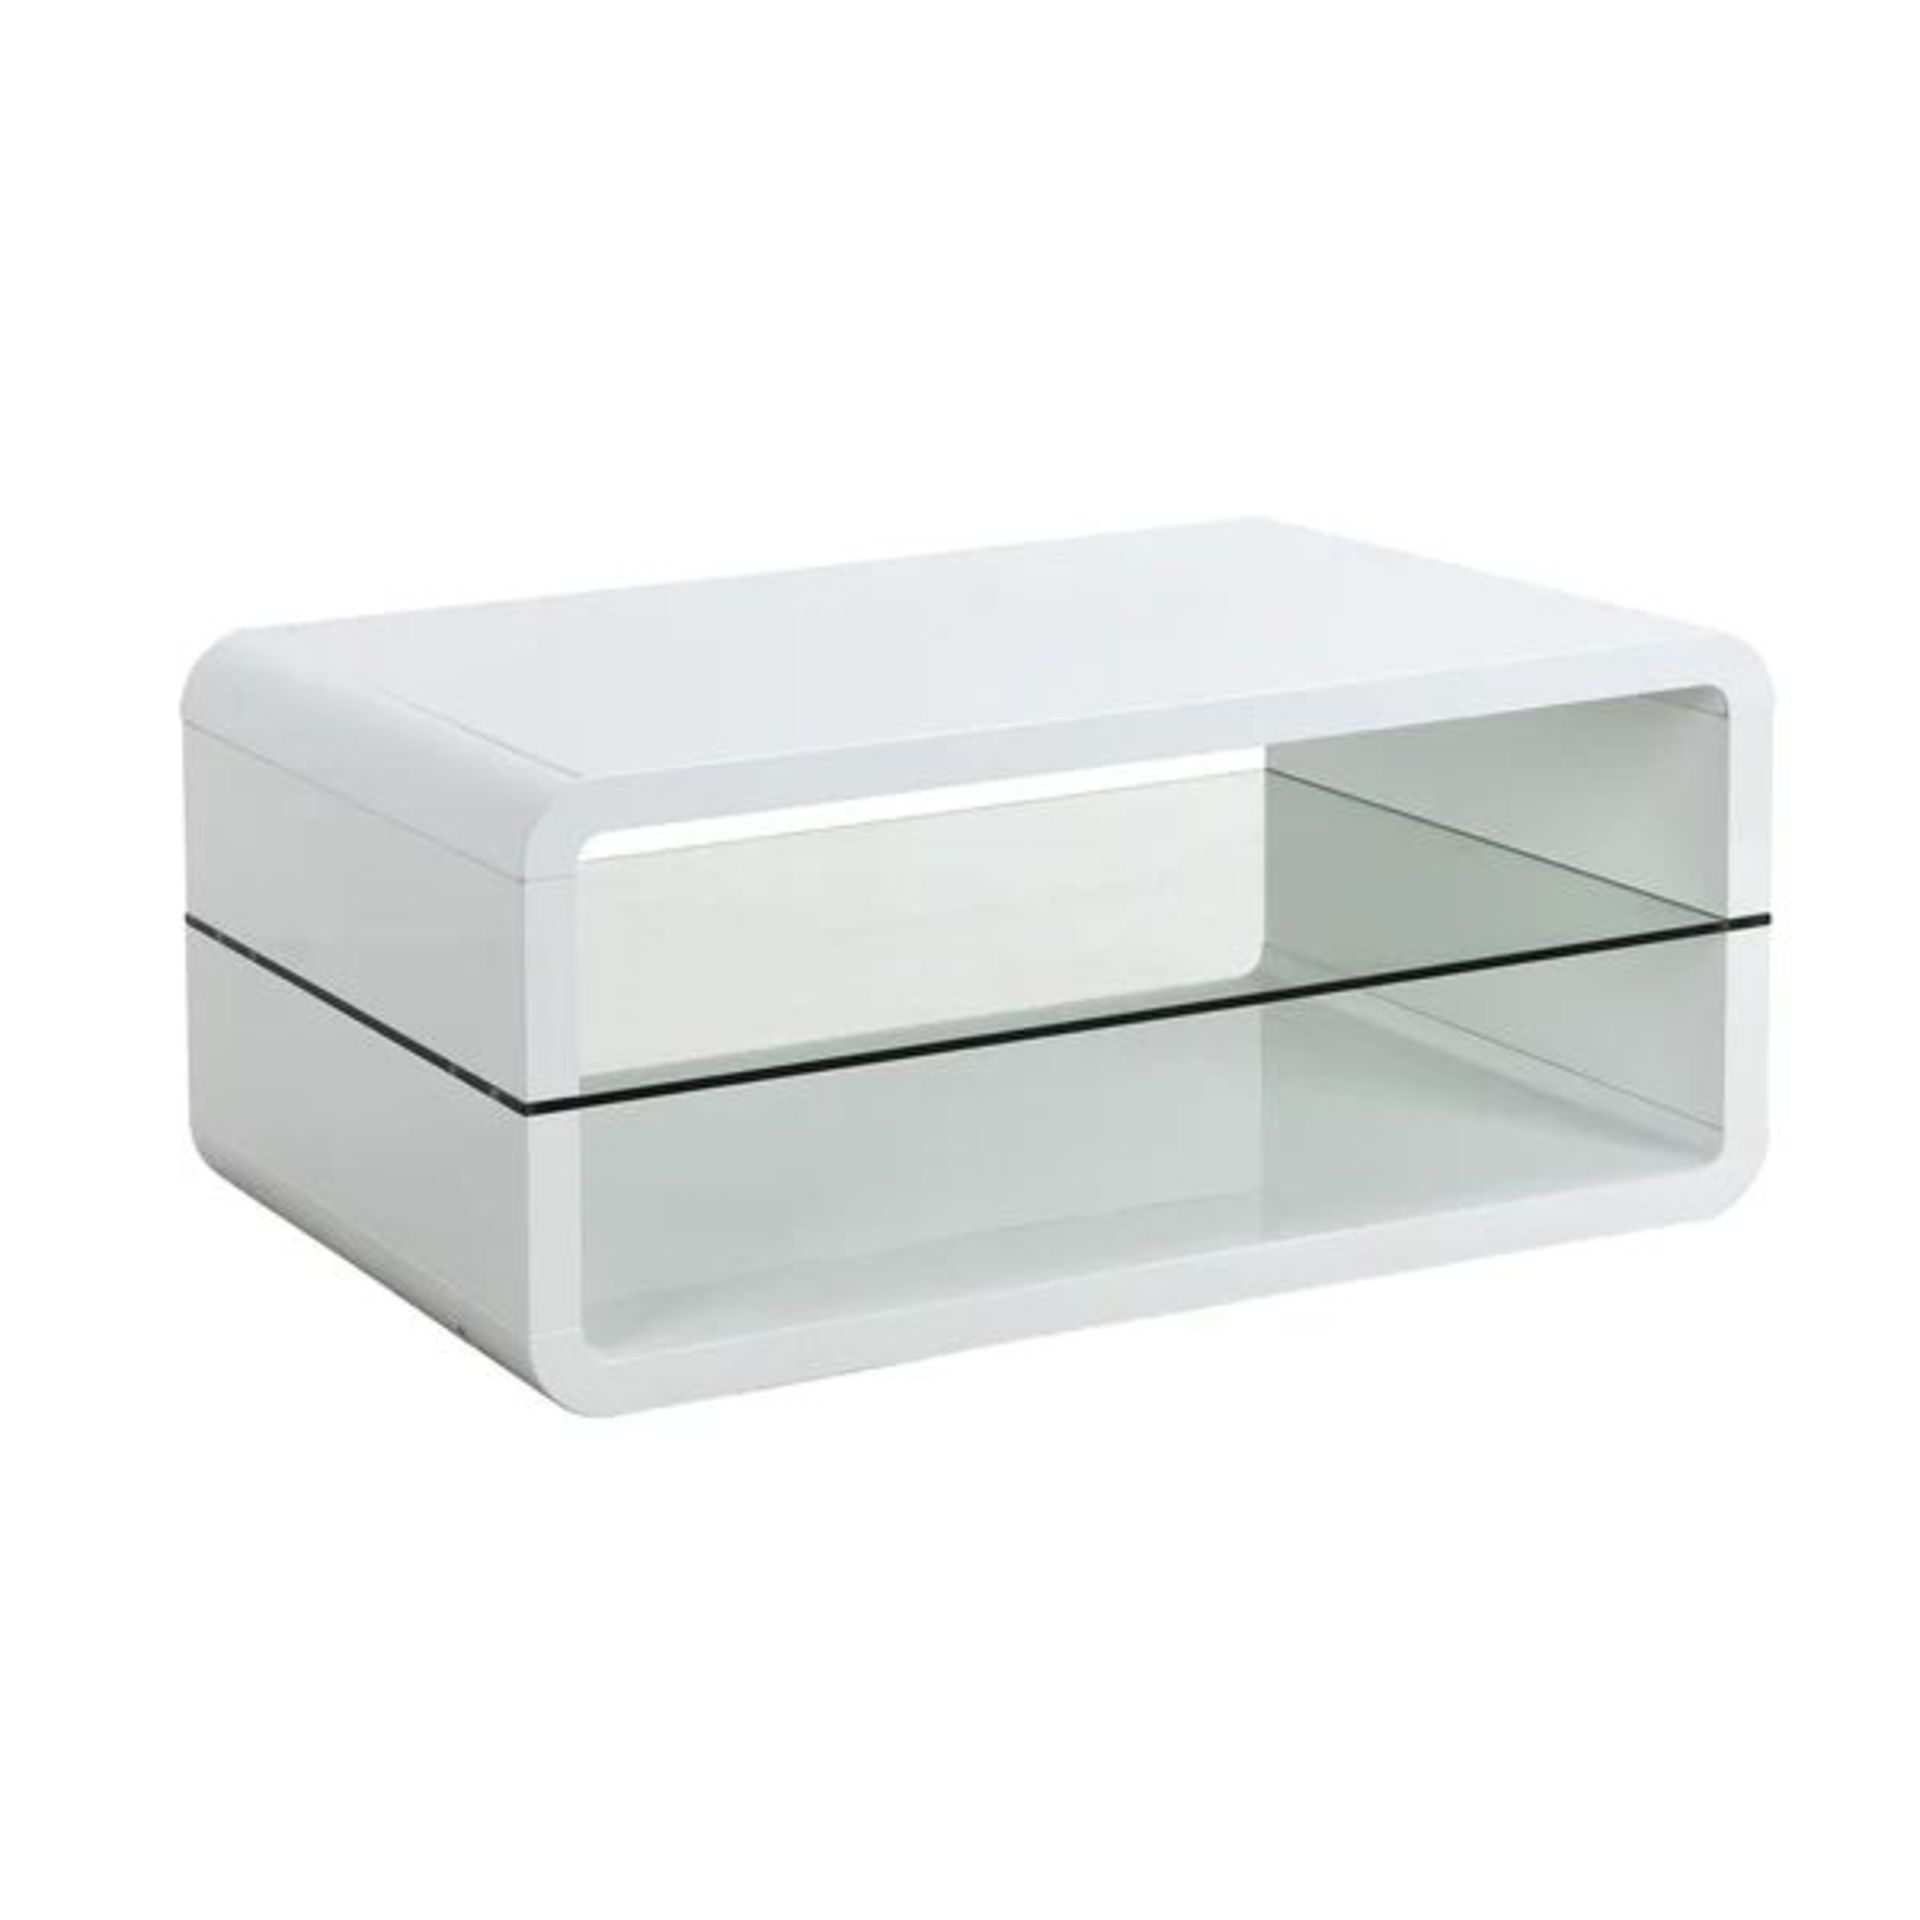 Lucent White High Gloss and Glass Shelf Coffee Table. - R14. RRP £219.99. Our Lucent coffee table - Image 2 of 2